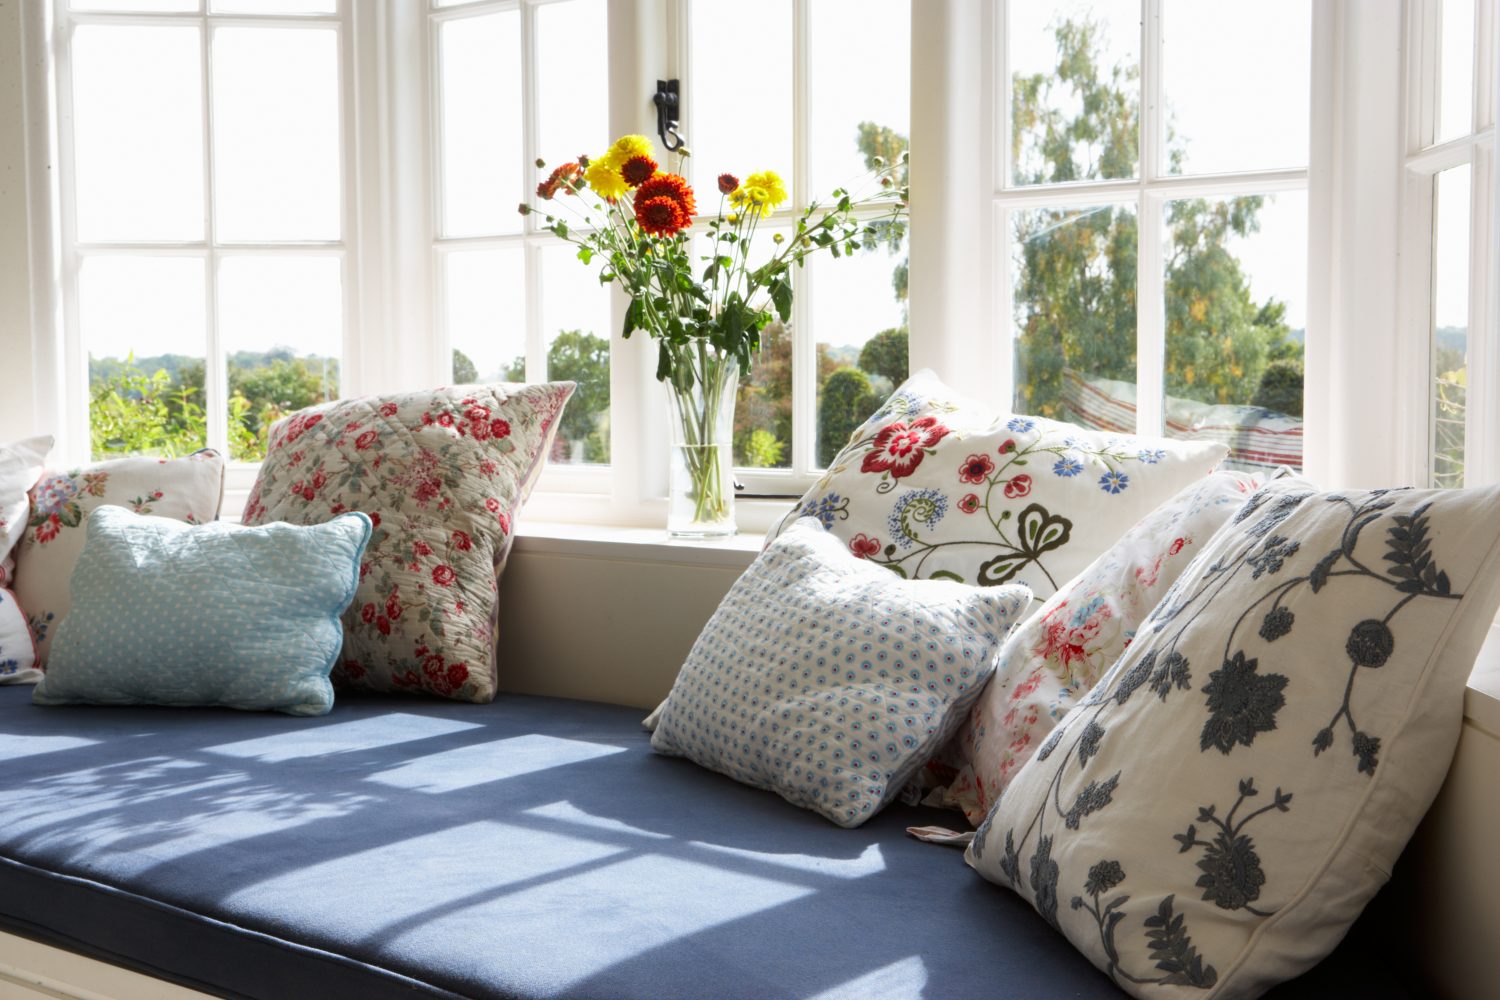 Buying Made to Measure Cushion Covers